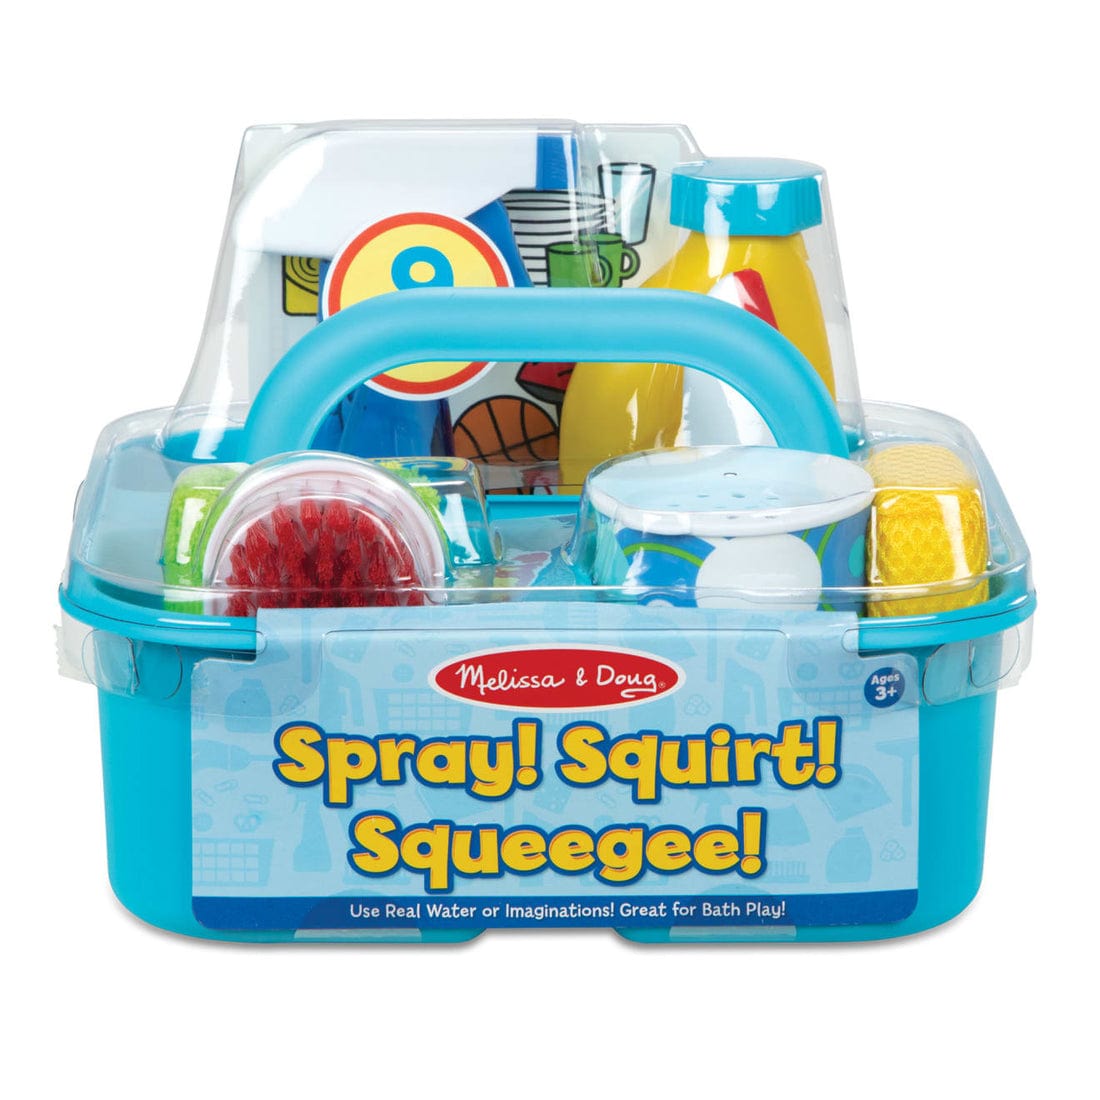 Melissa & Doug Melissa & Doug Let's Play House! Spray, Squirt & Squeegee Play Set - Little Miss Muffin Children & Home